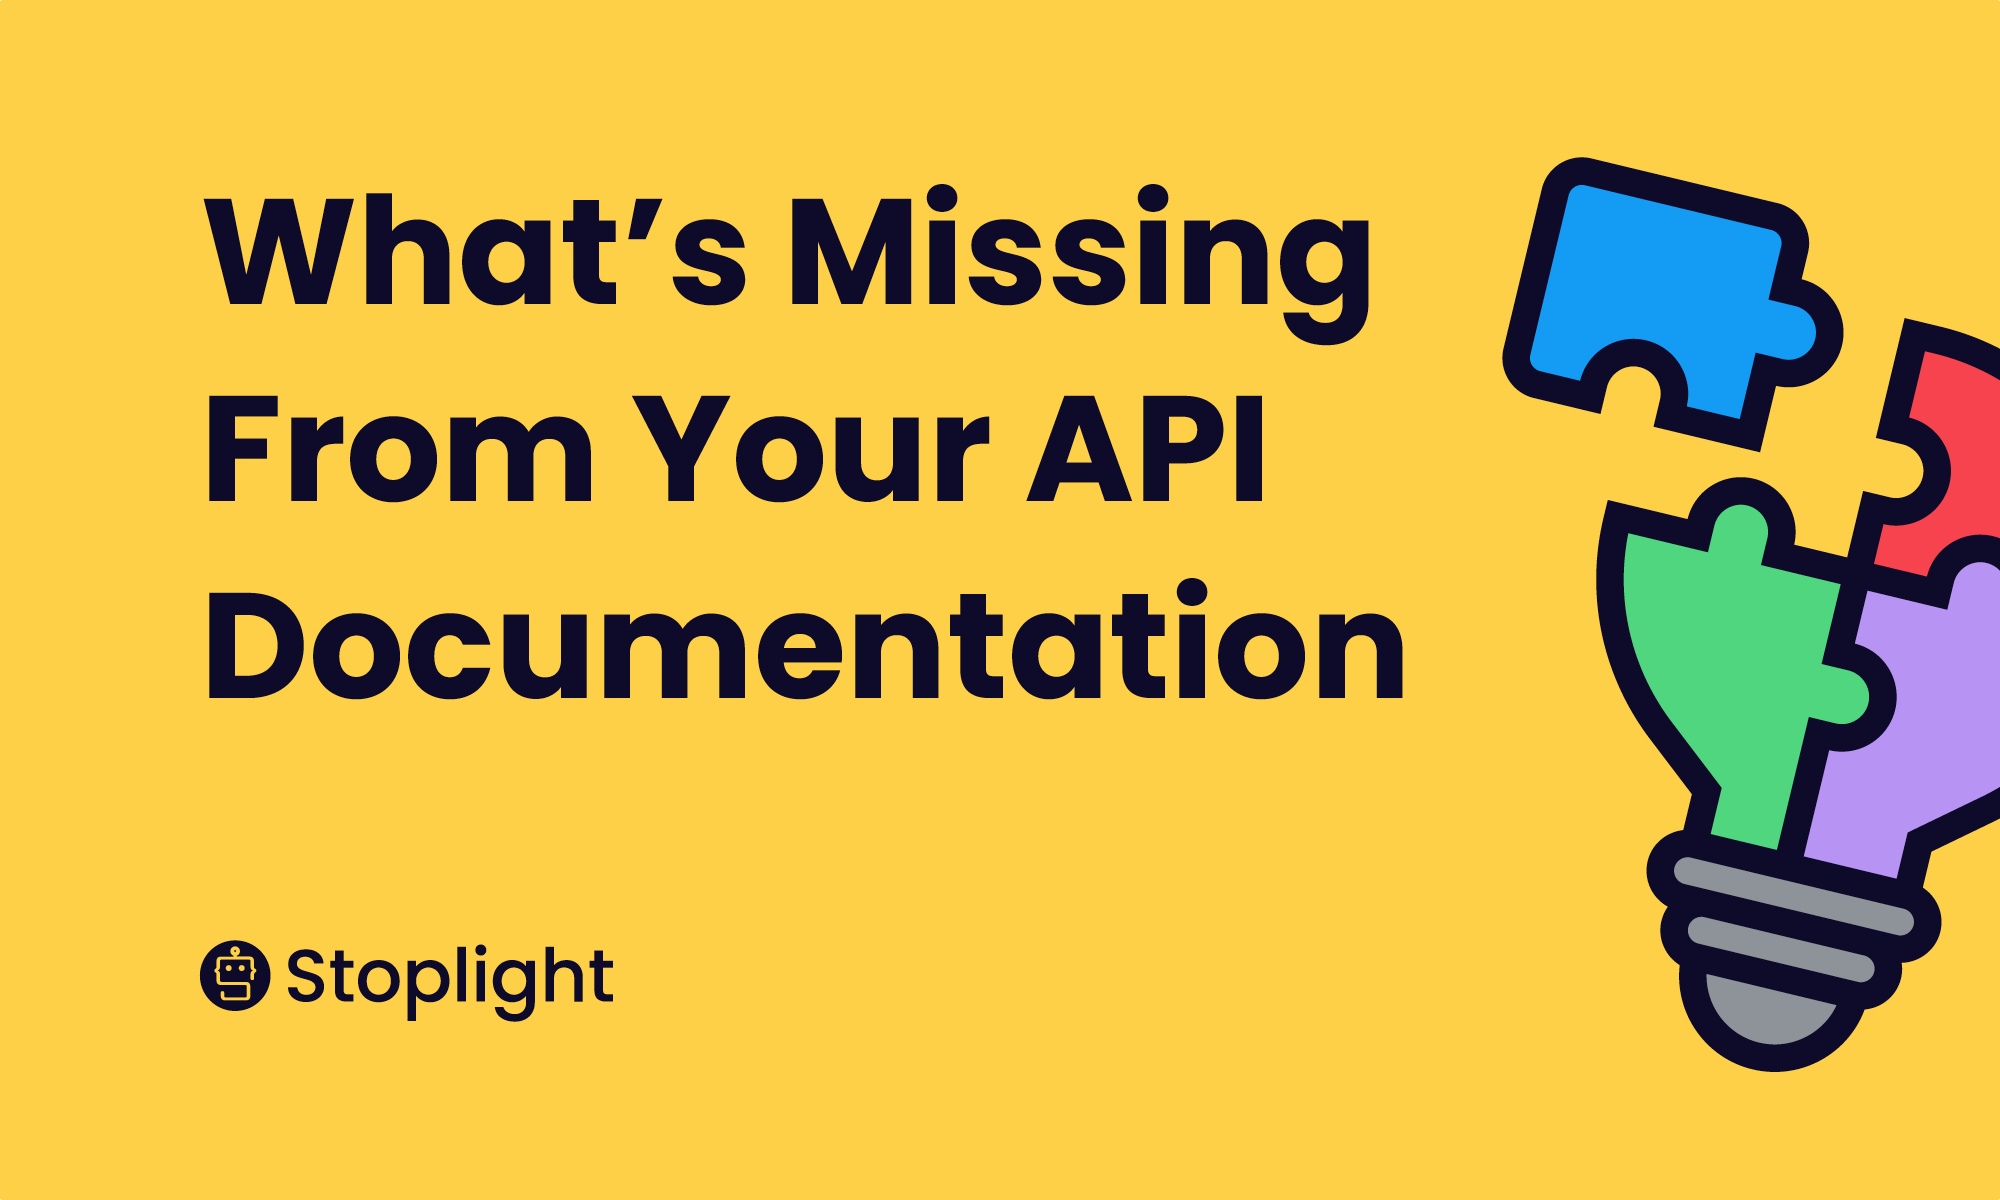 What’s Missing From Your API Documentation